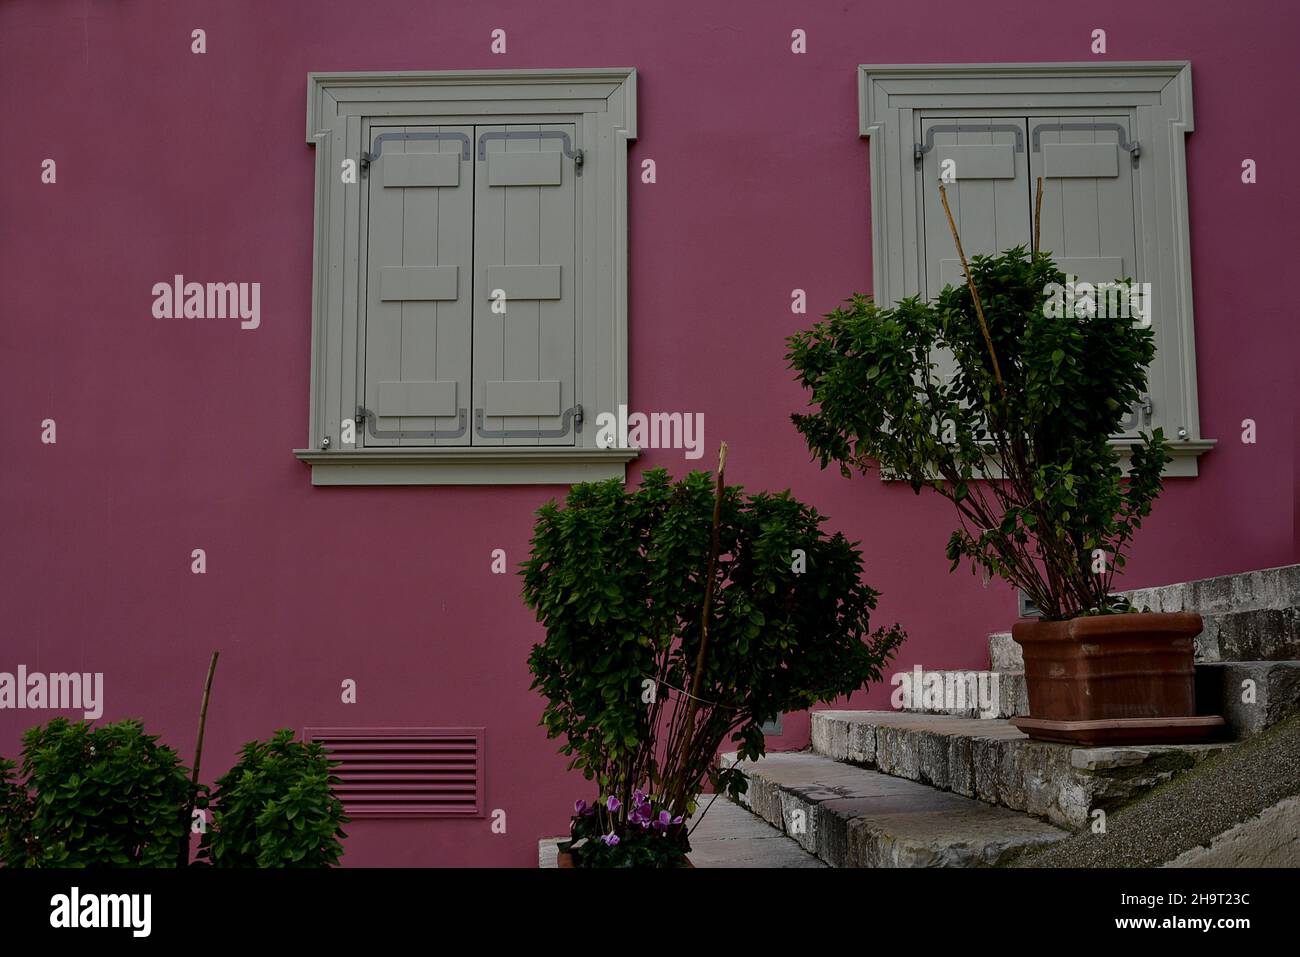 Neoclassical building facade with a bubble gum pink stucco wall, grey wooden window shutters and basil plants on the stone steps in Nafplio, Greece. Stock Photo